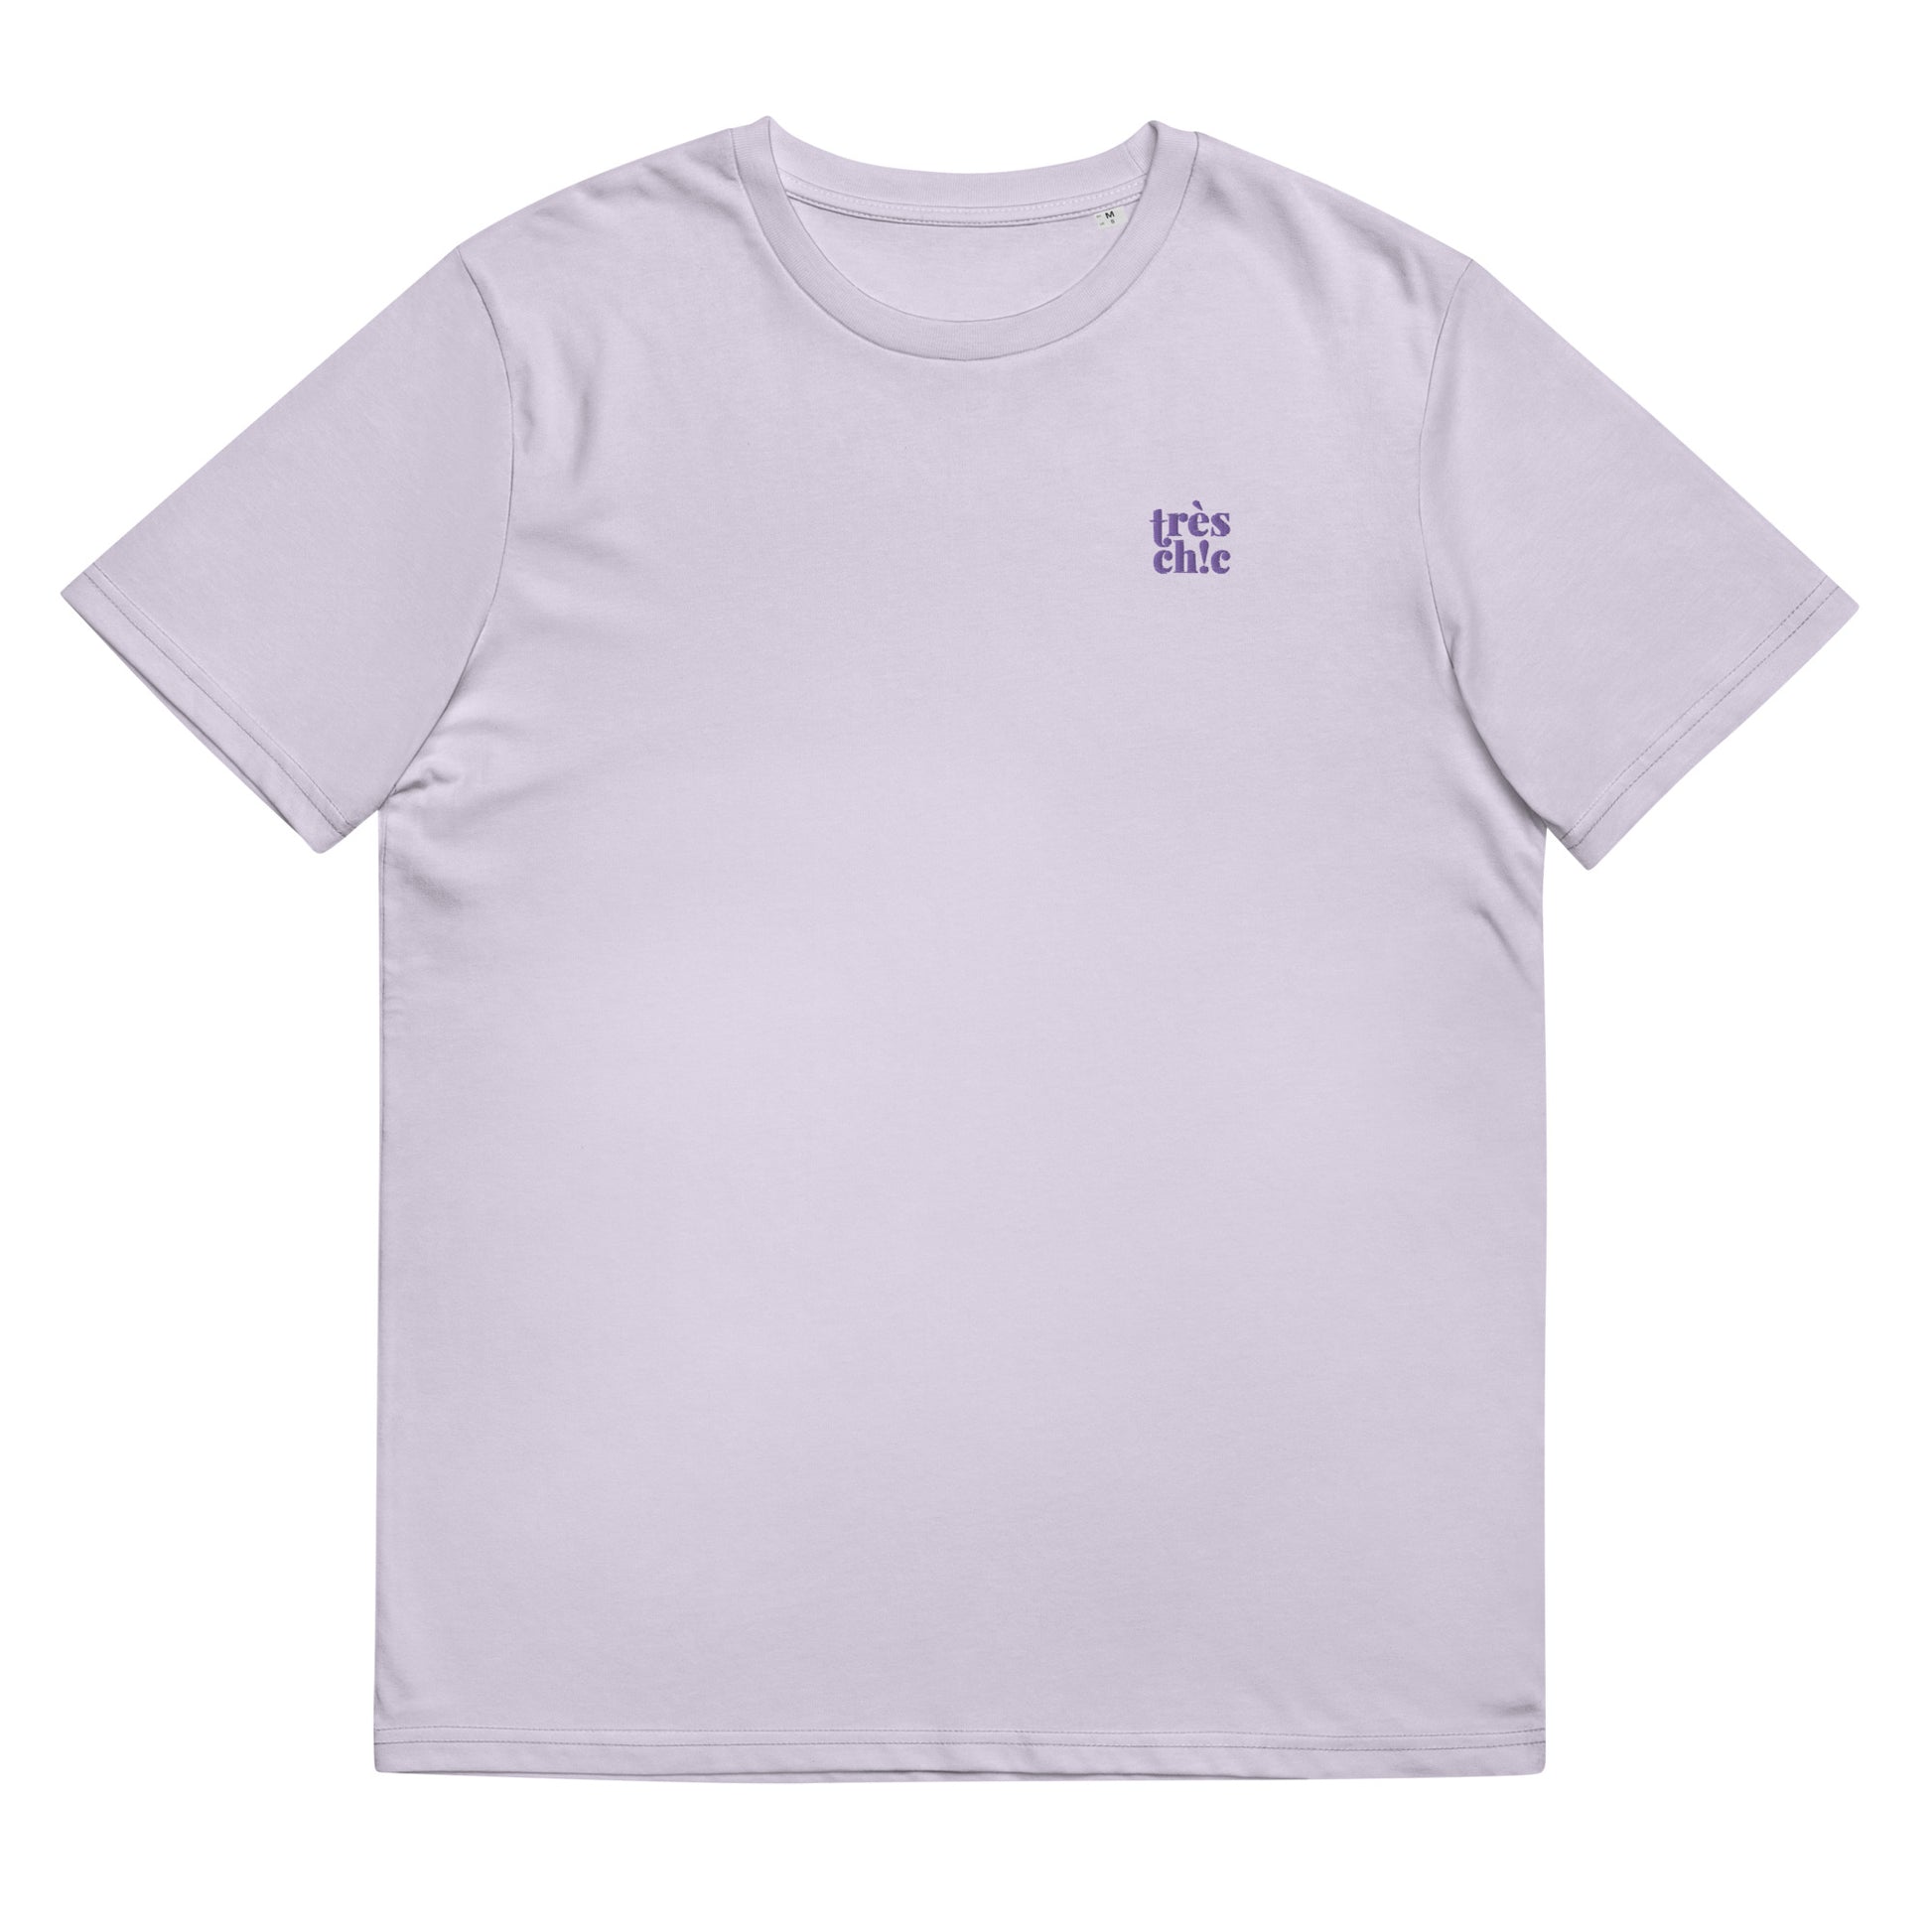 Fitted lavender organic cotton t-shirt with a small embroidery - "très chic" on the left chest. Available in sizes S to 3XL.